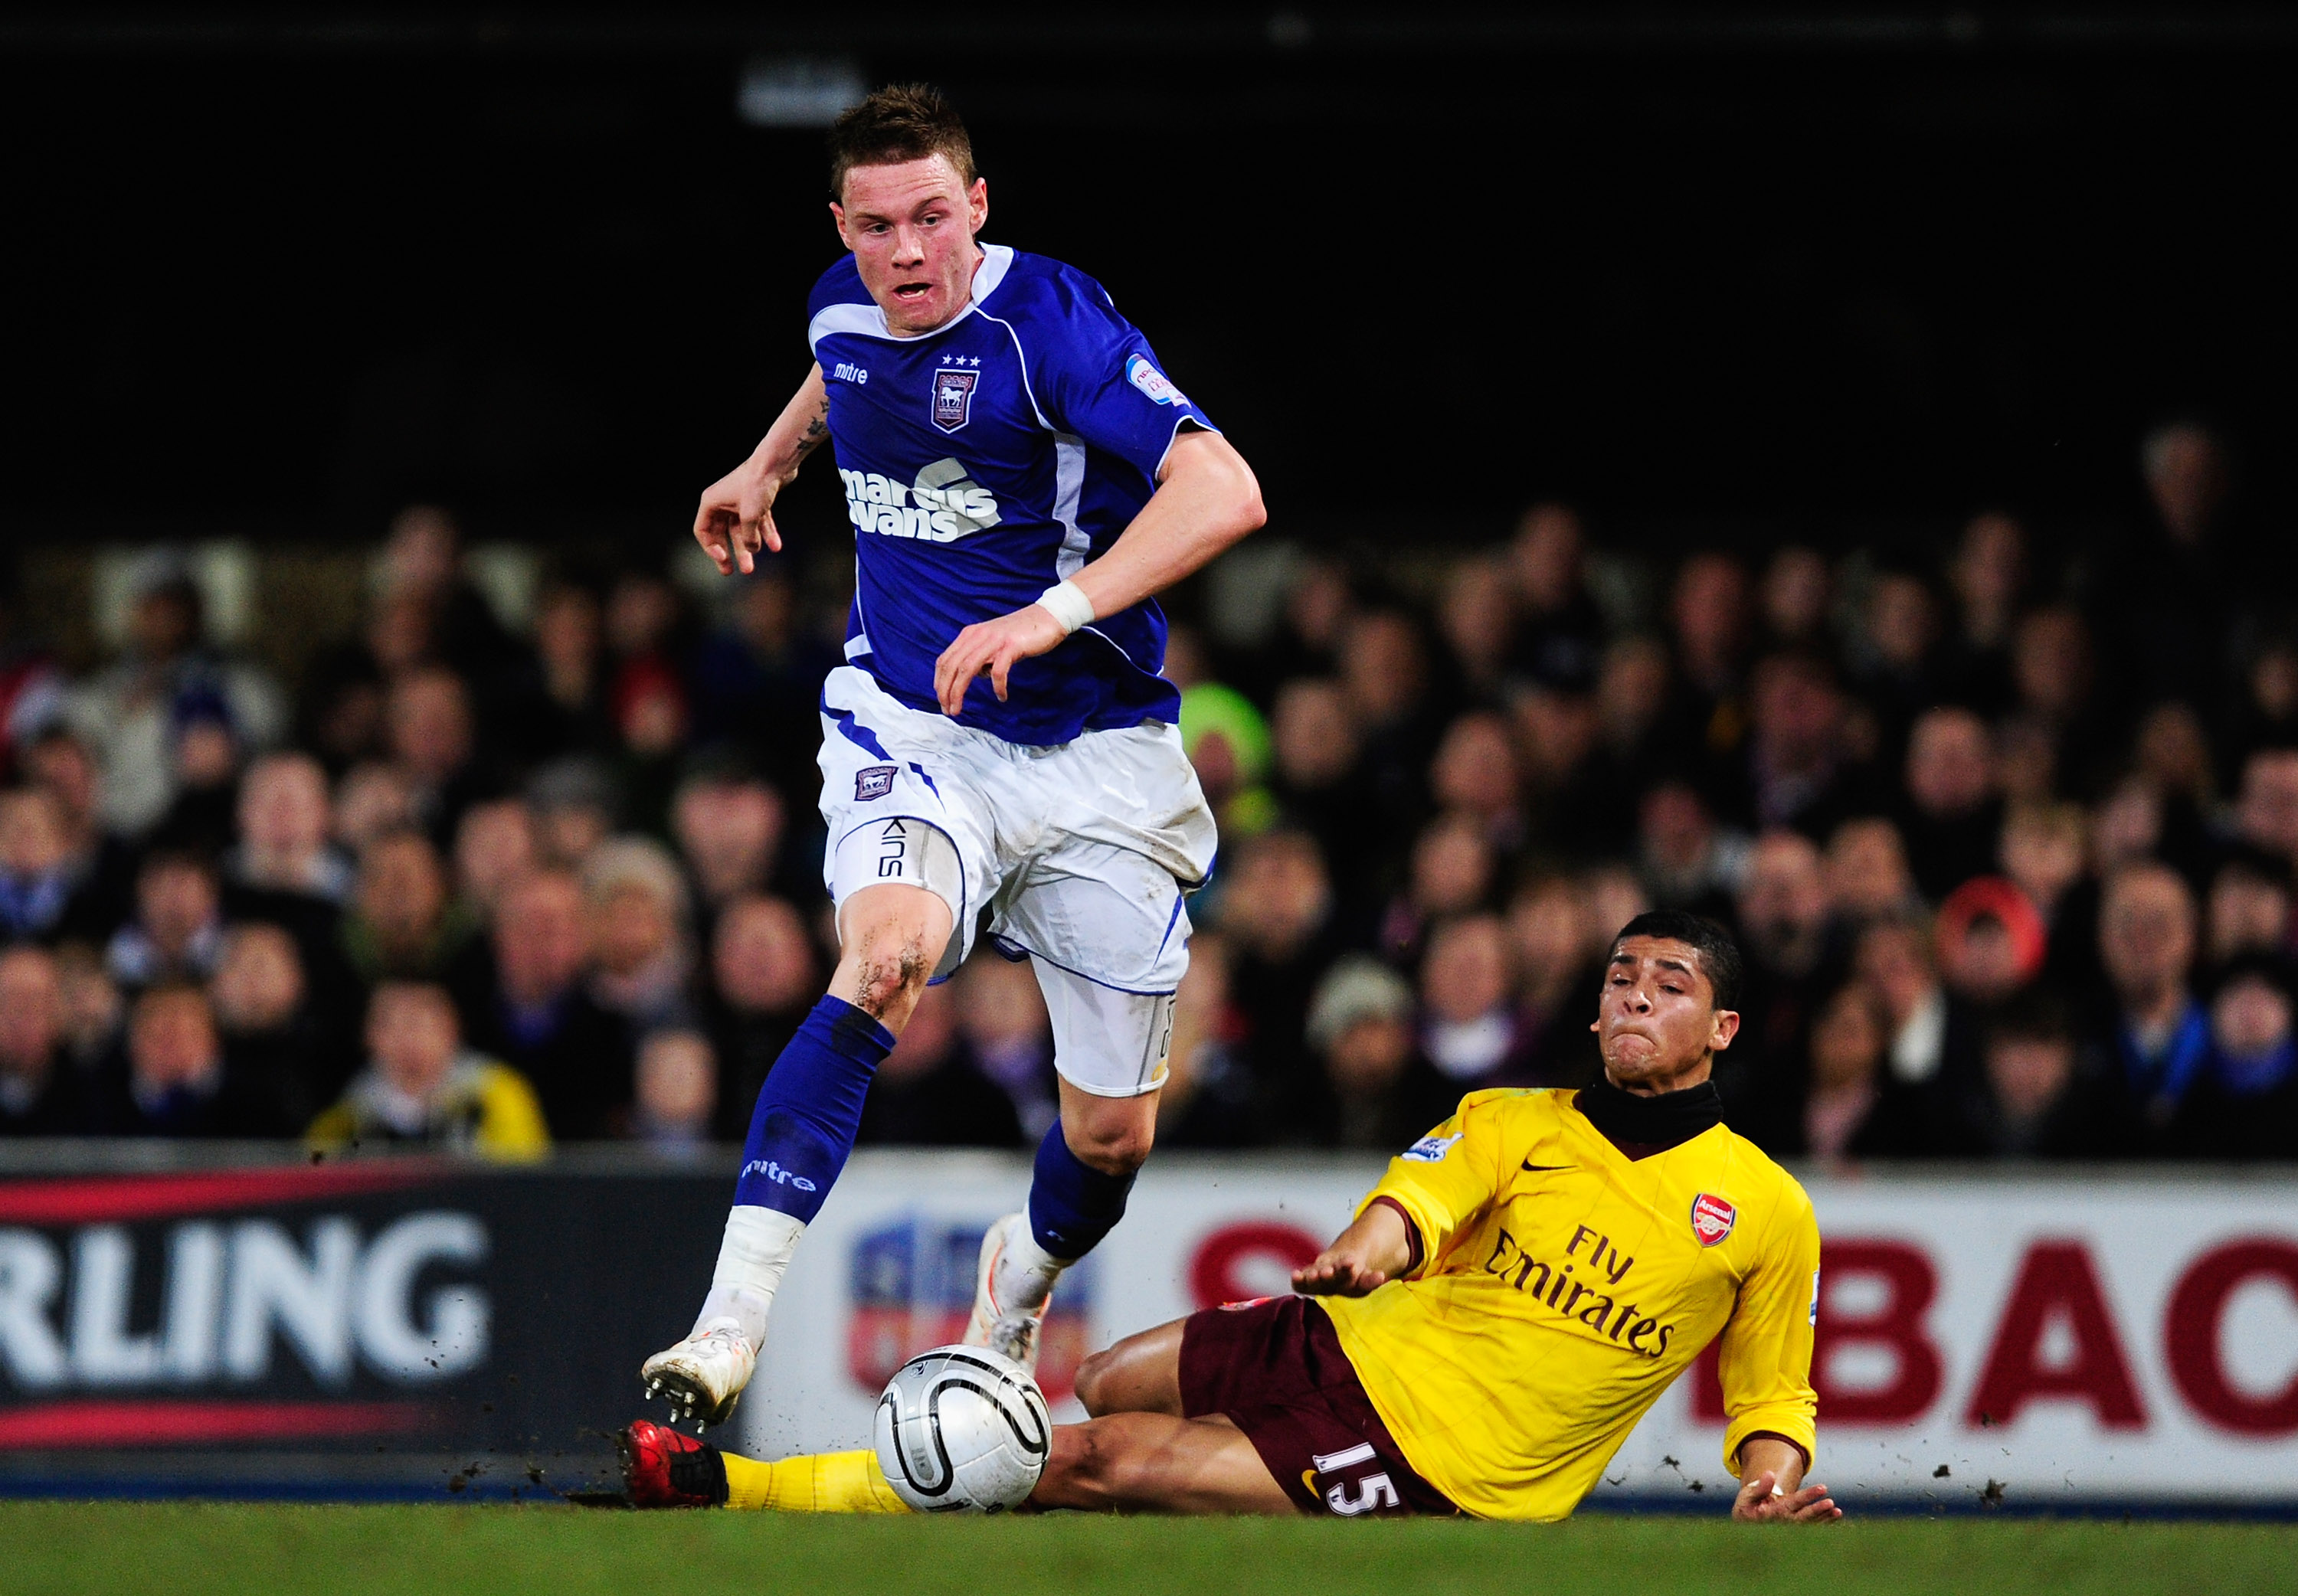 IPSWICH, ENGLAND - JANUARY 12: Connor Wickham of Ipswich Town is challenged by Denilson of Arsenal during the Carling Cup Semi Final First Leg match between Ipswich Town and Arsenal at Portman Road on January 12, 2011 in Ipswich, England.  (Photo by Jamie